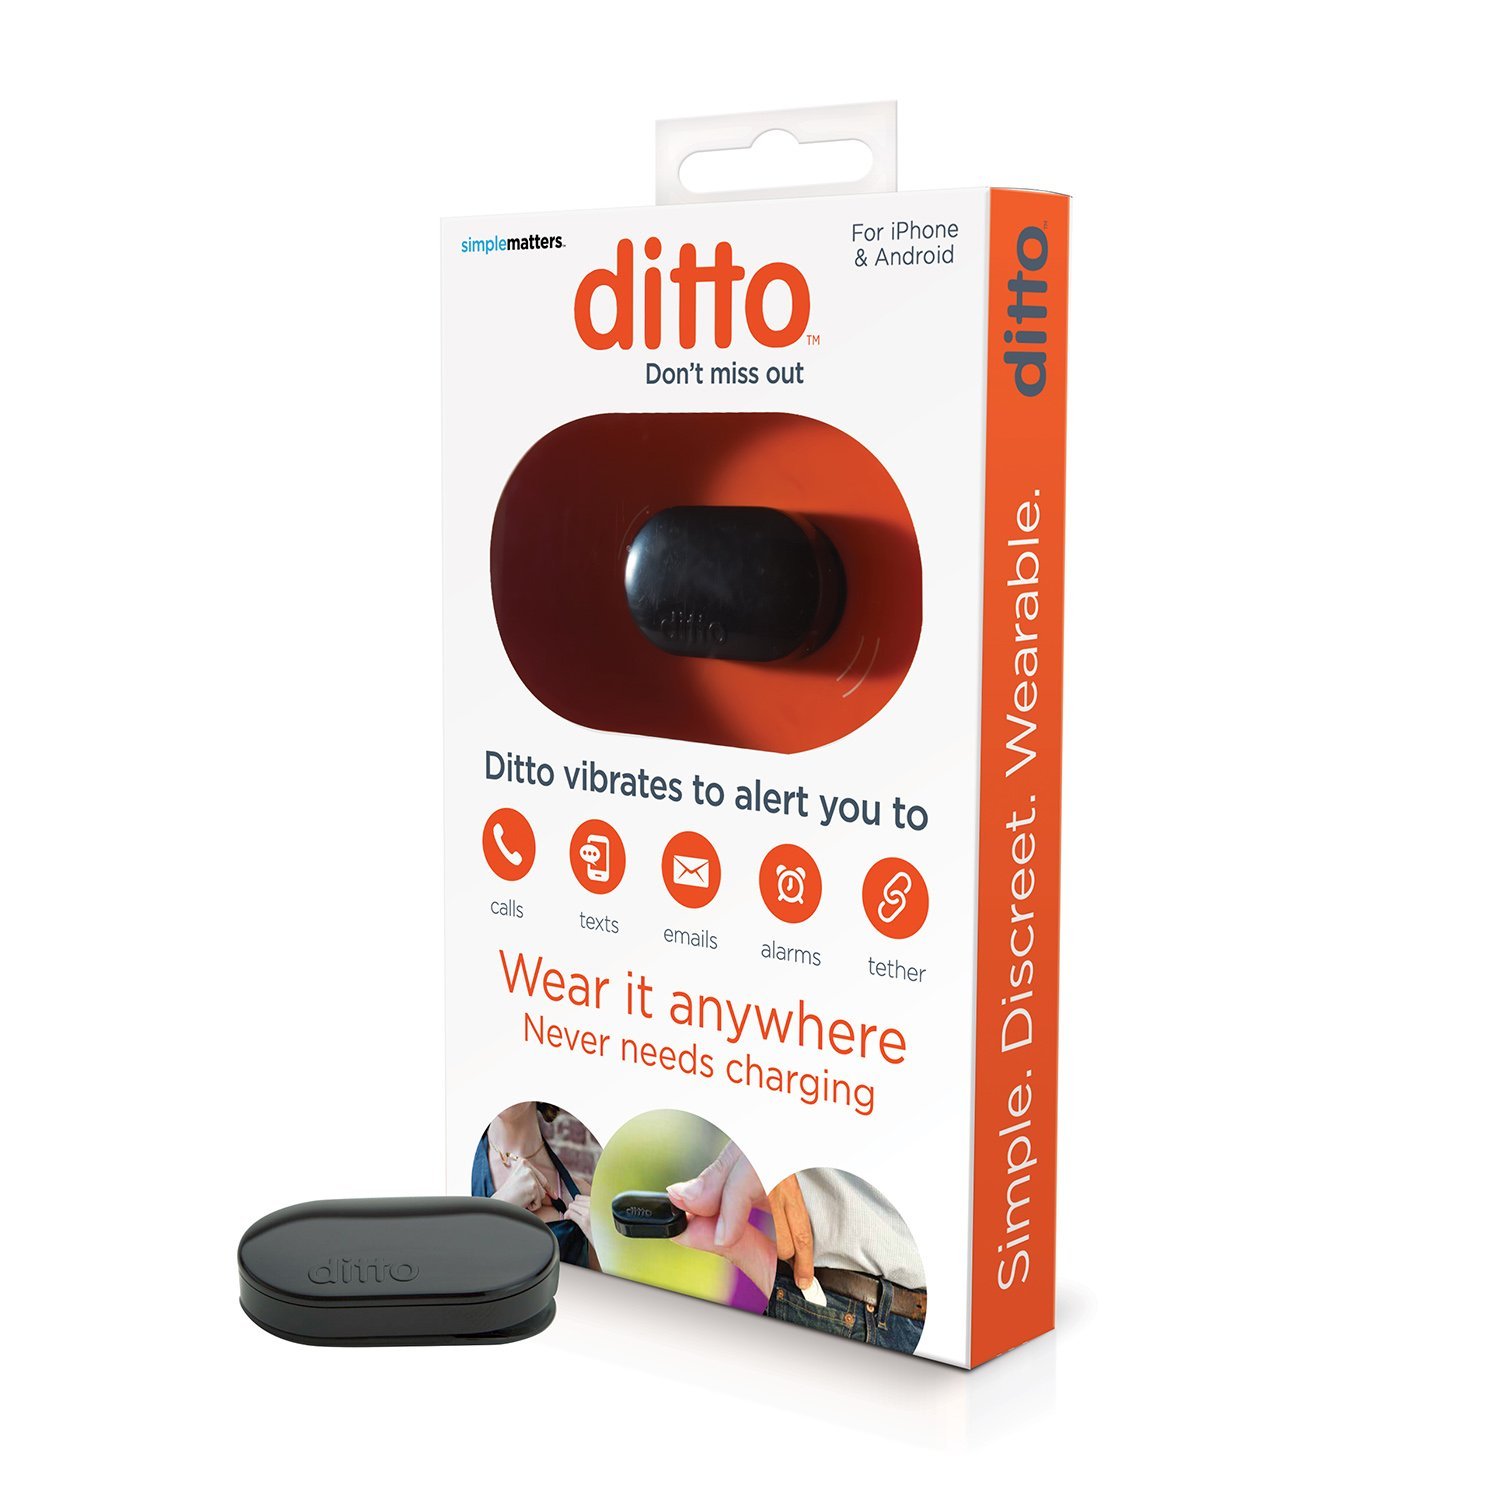 Thumbnail of Ditto Vibrating Mobile Phone Alert System.